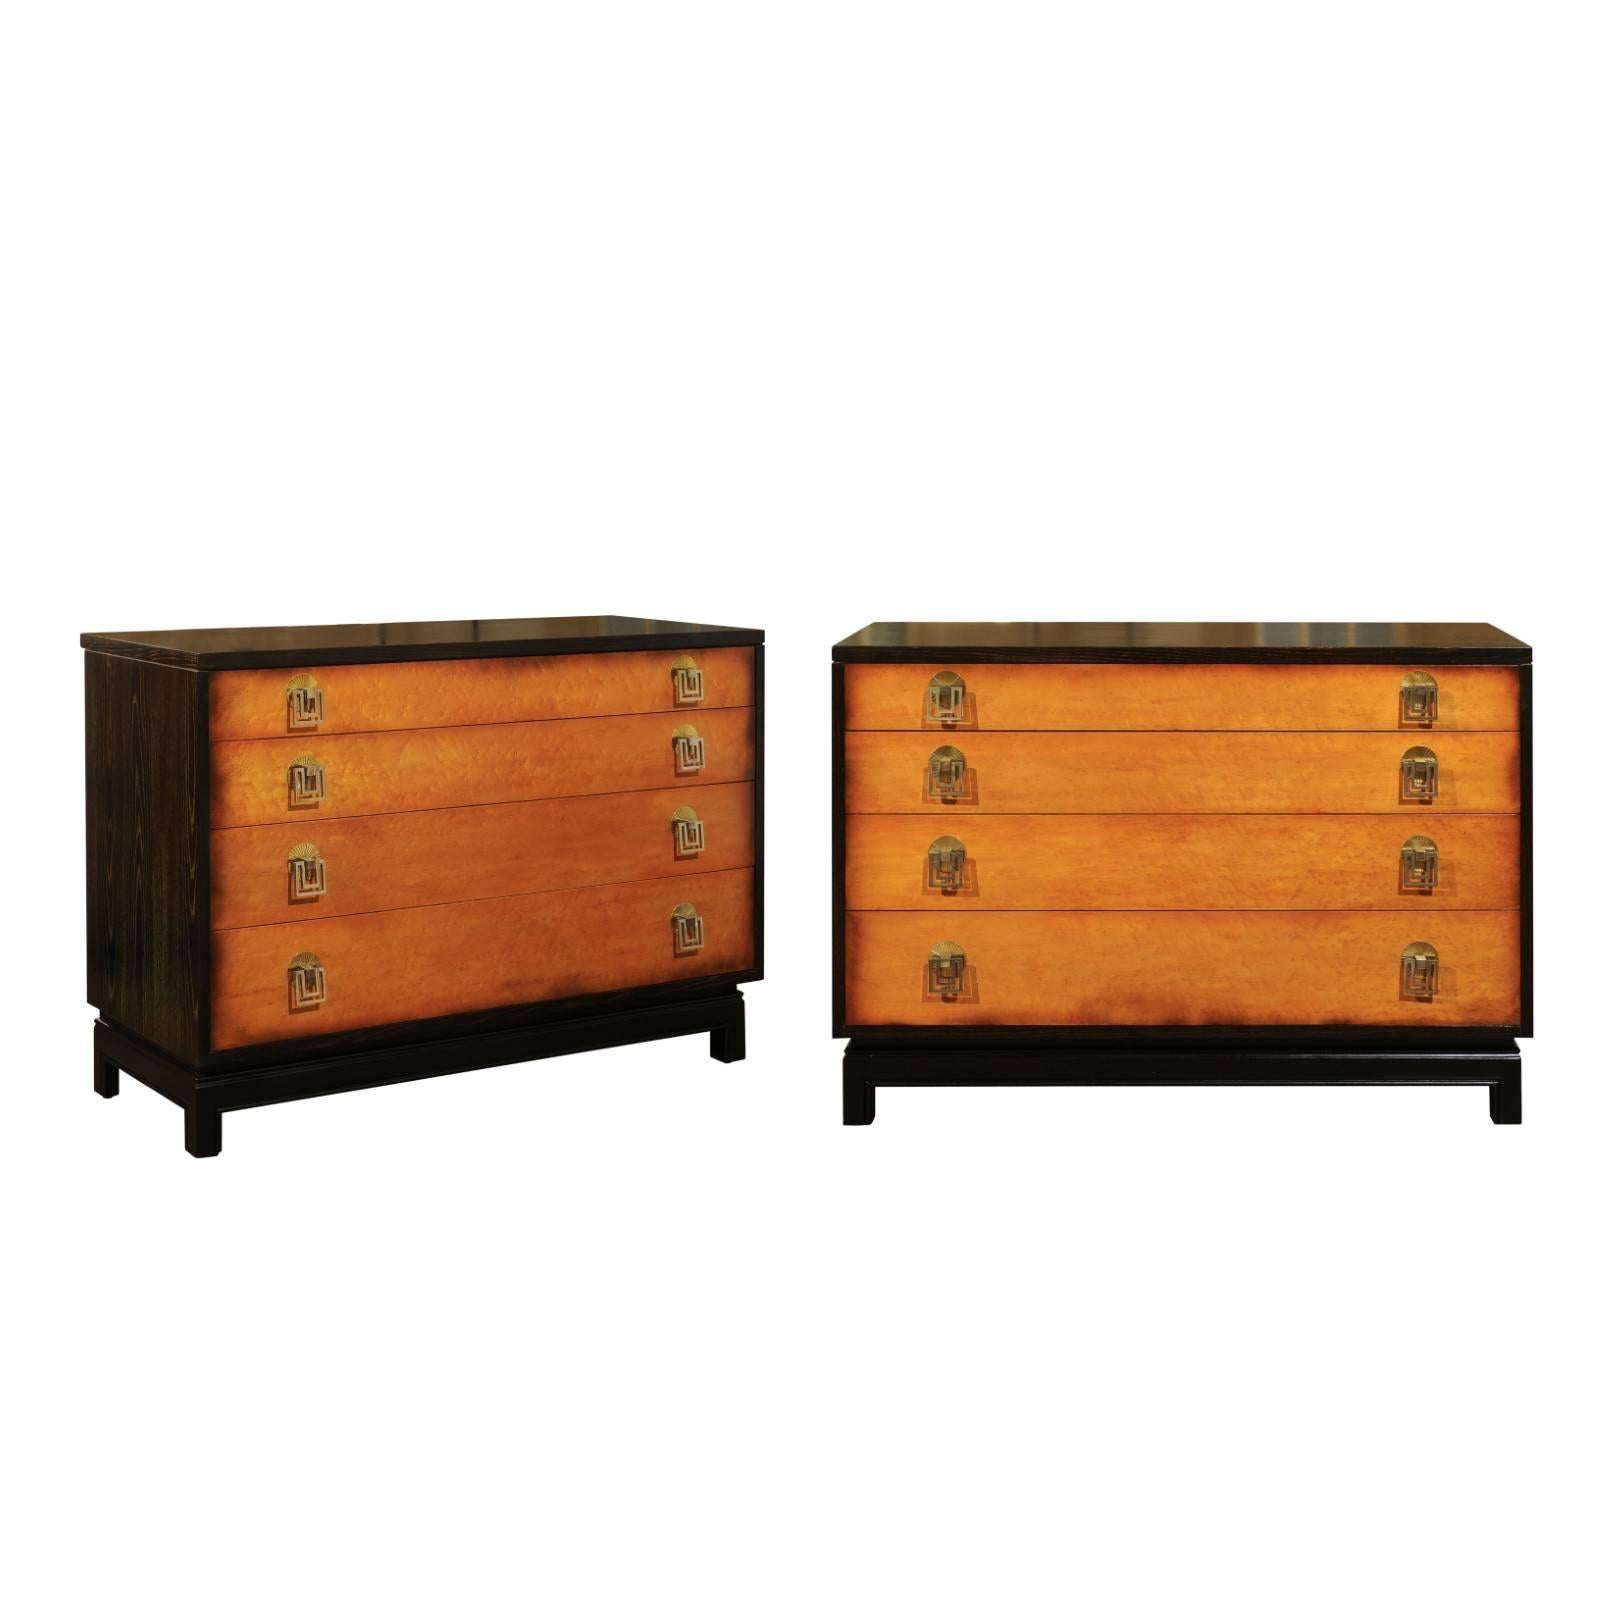 Breathtaking Pair of Chests by Renzo Rutili in Cerused Oak and Birdseye Maple